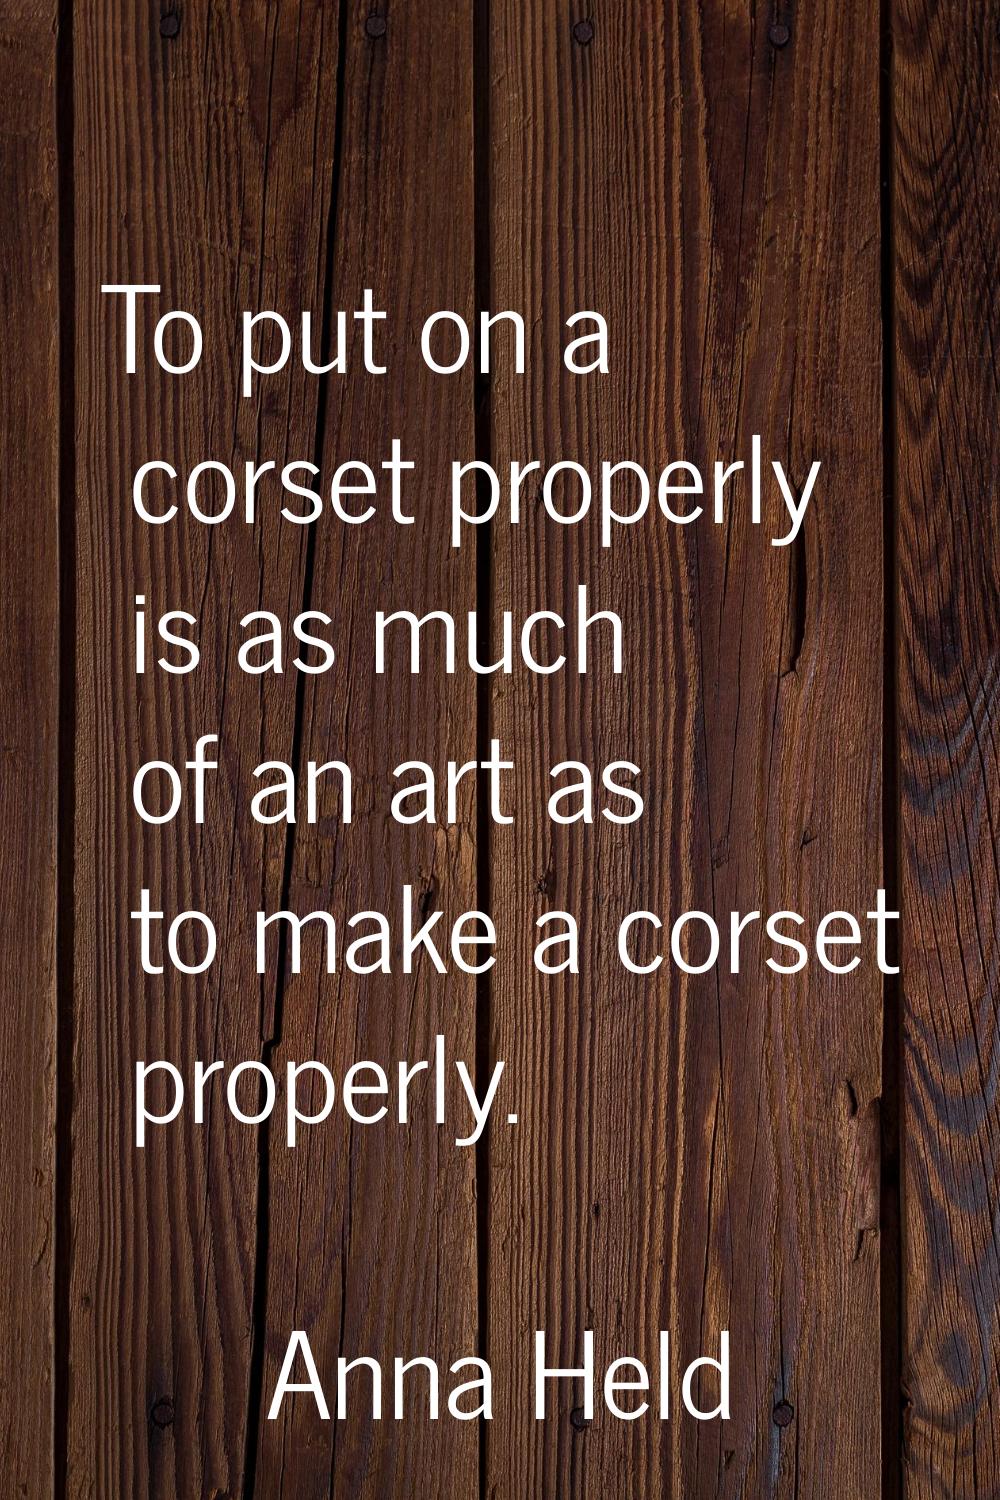 To put on a corset properly is as much of an art as to make a corset properly.